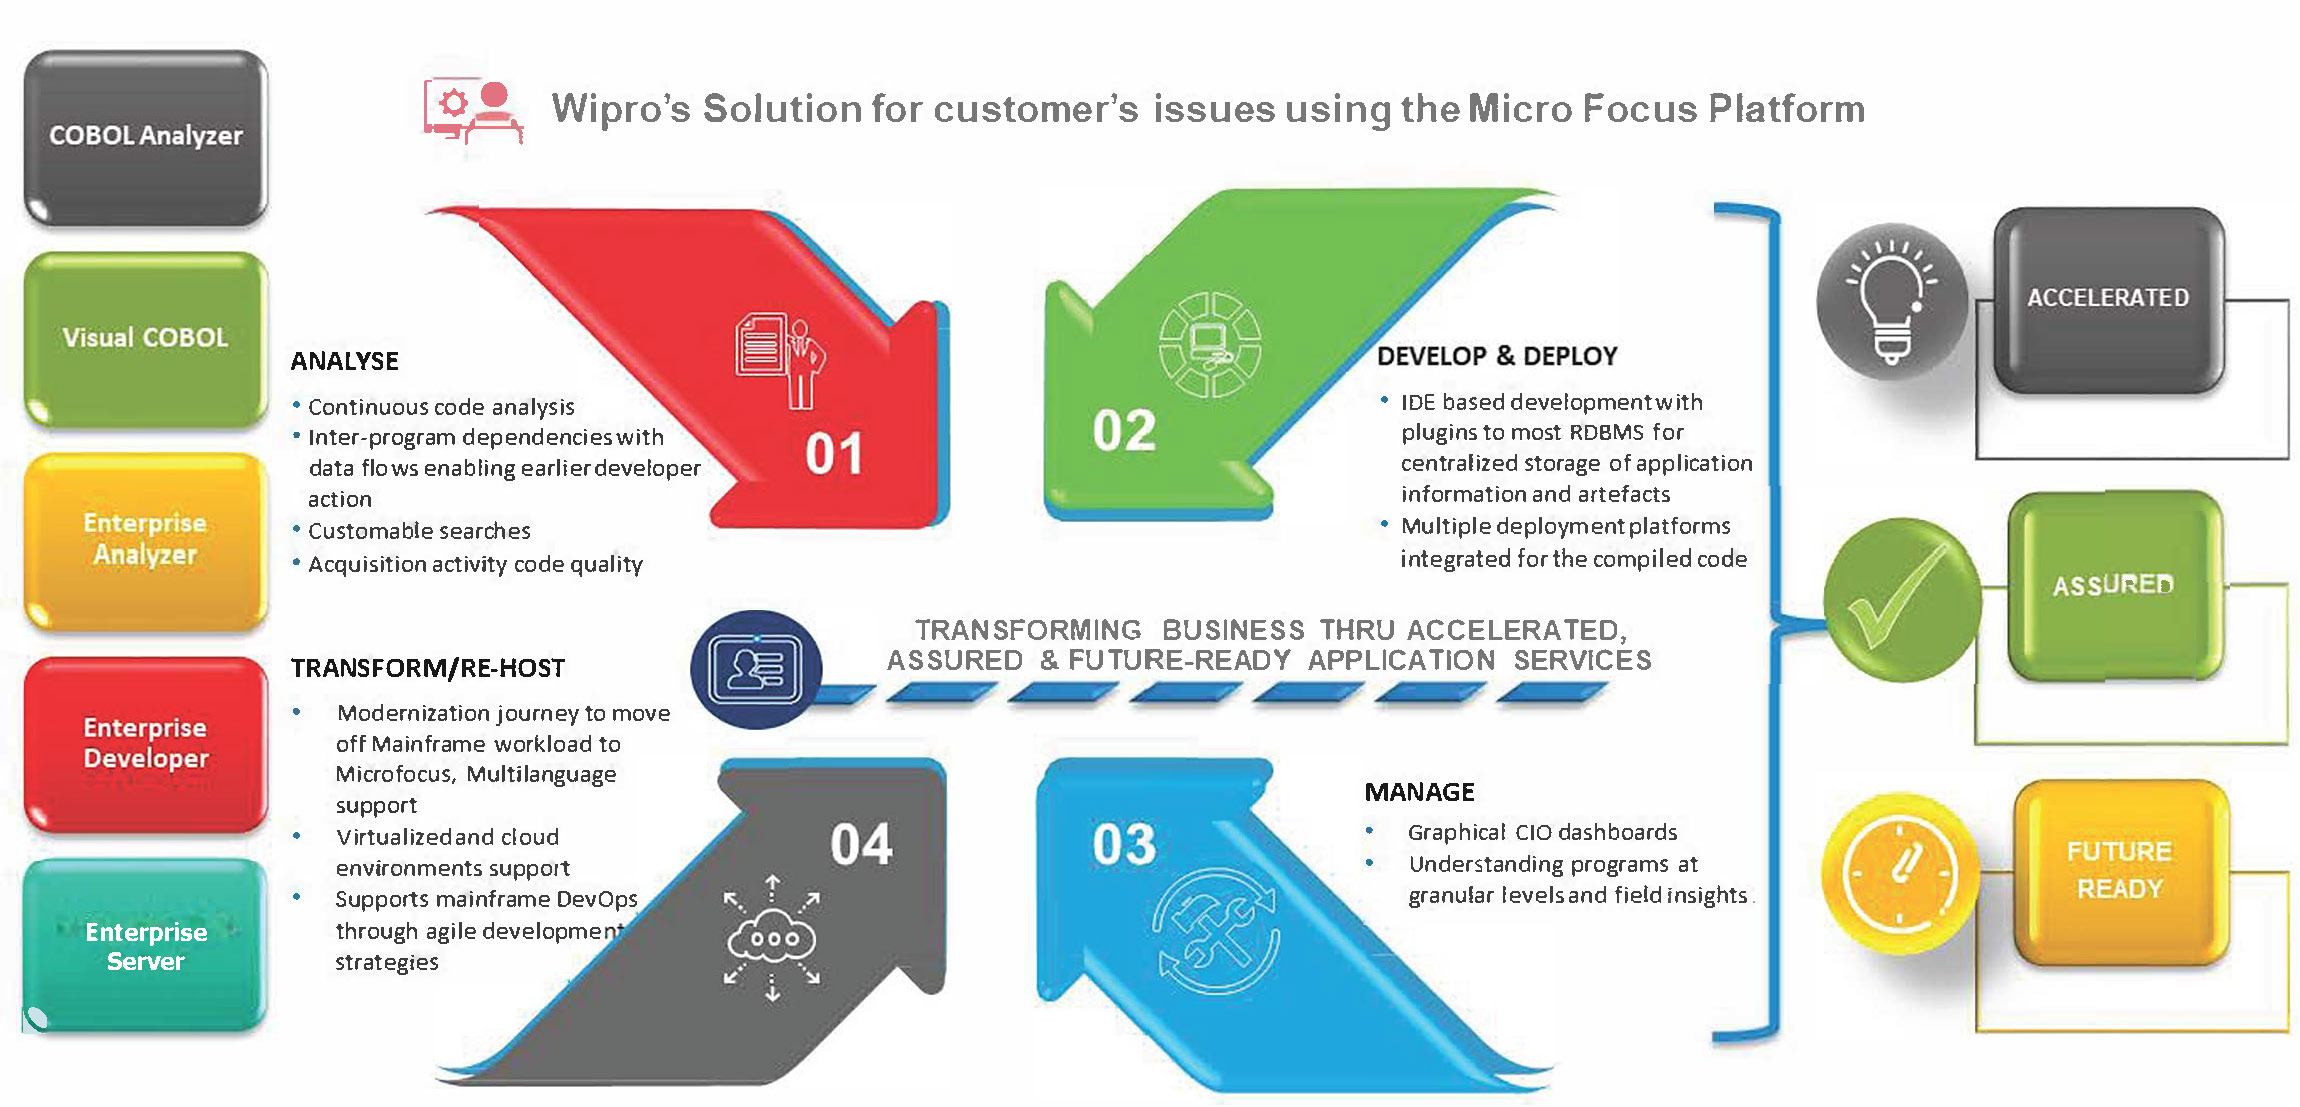 Mainframe Modernization and Connectivity from Micro Focus, a trusted modernization partner of Wipro